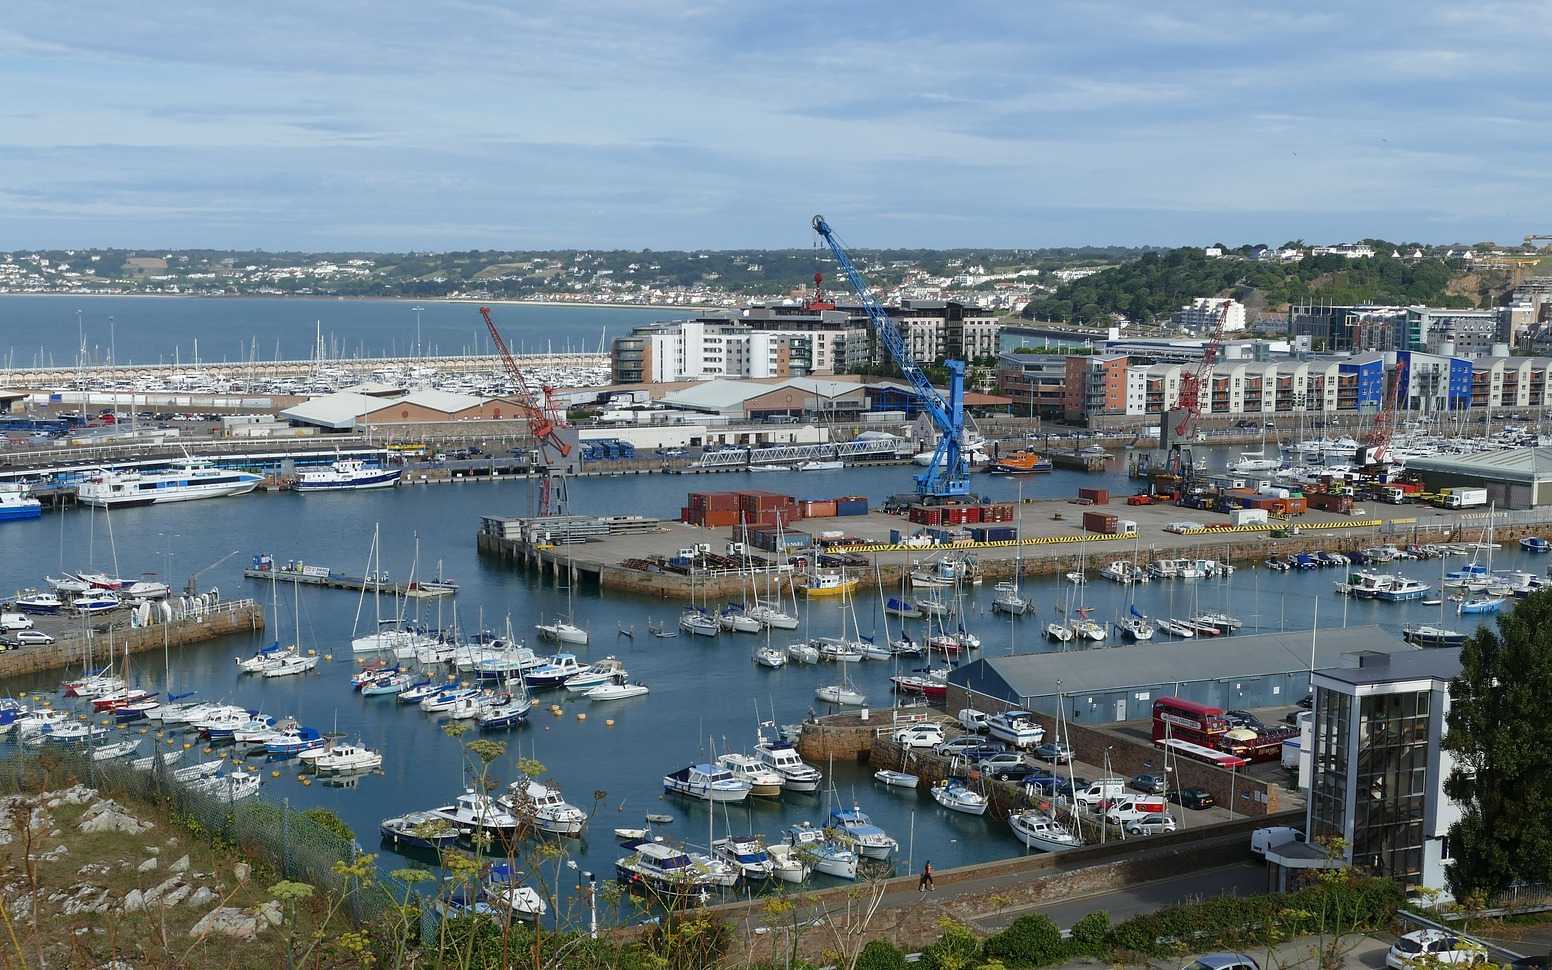 Ports of Jersey upgrade to smart access control at St Helier harbour